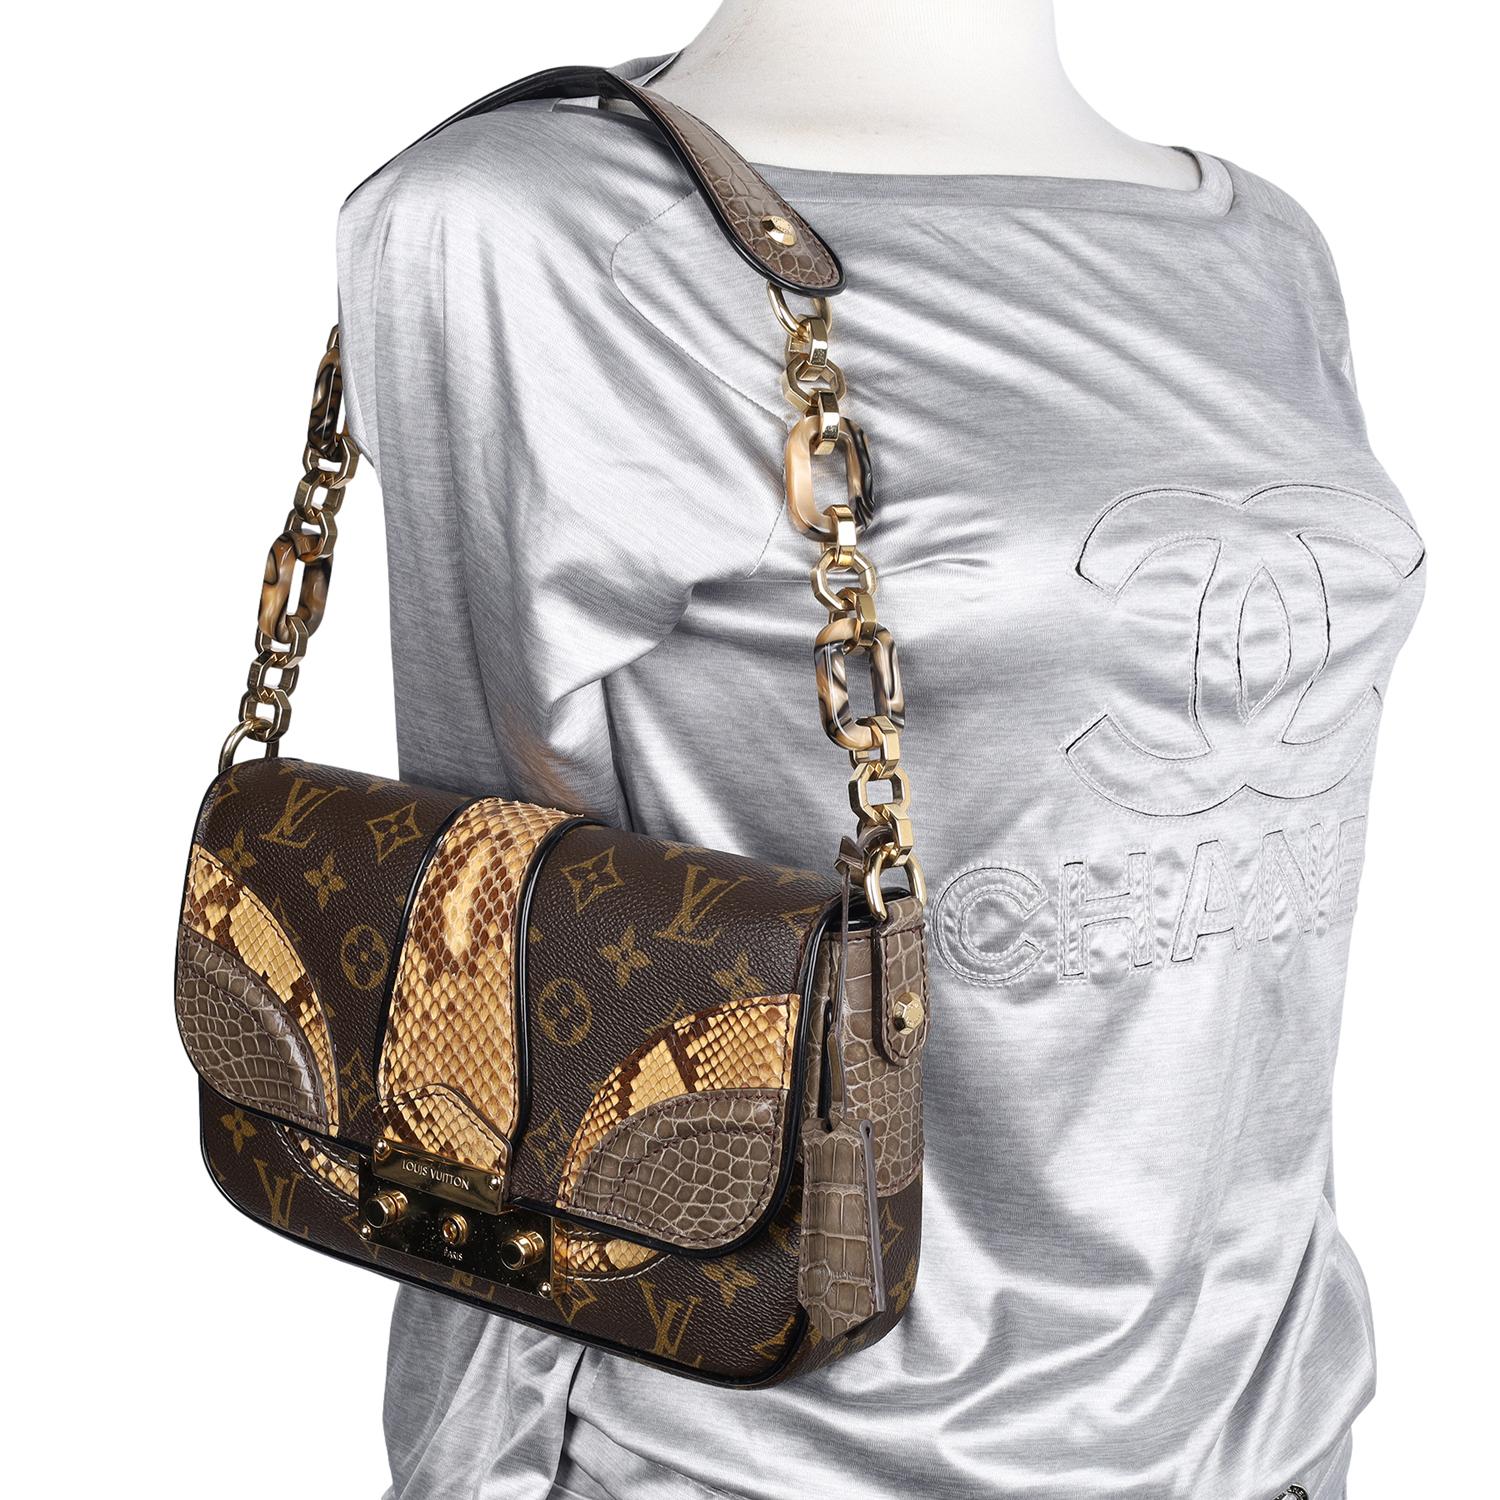 Authentic limited edition Louis Vuitton Brown Monogramissime Alligator and Python Bag.

Featured in the Fall/Winter 2010 collection, this Pochette bag from Louis Vuitton is a limited edition, constructed with the brand's signature monogram canvas